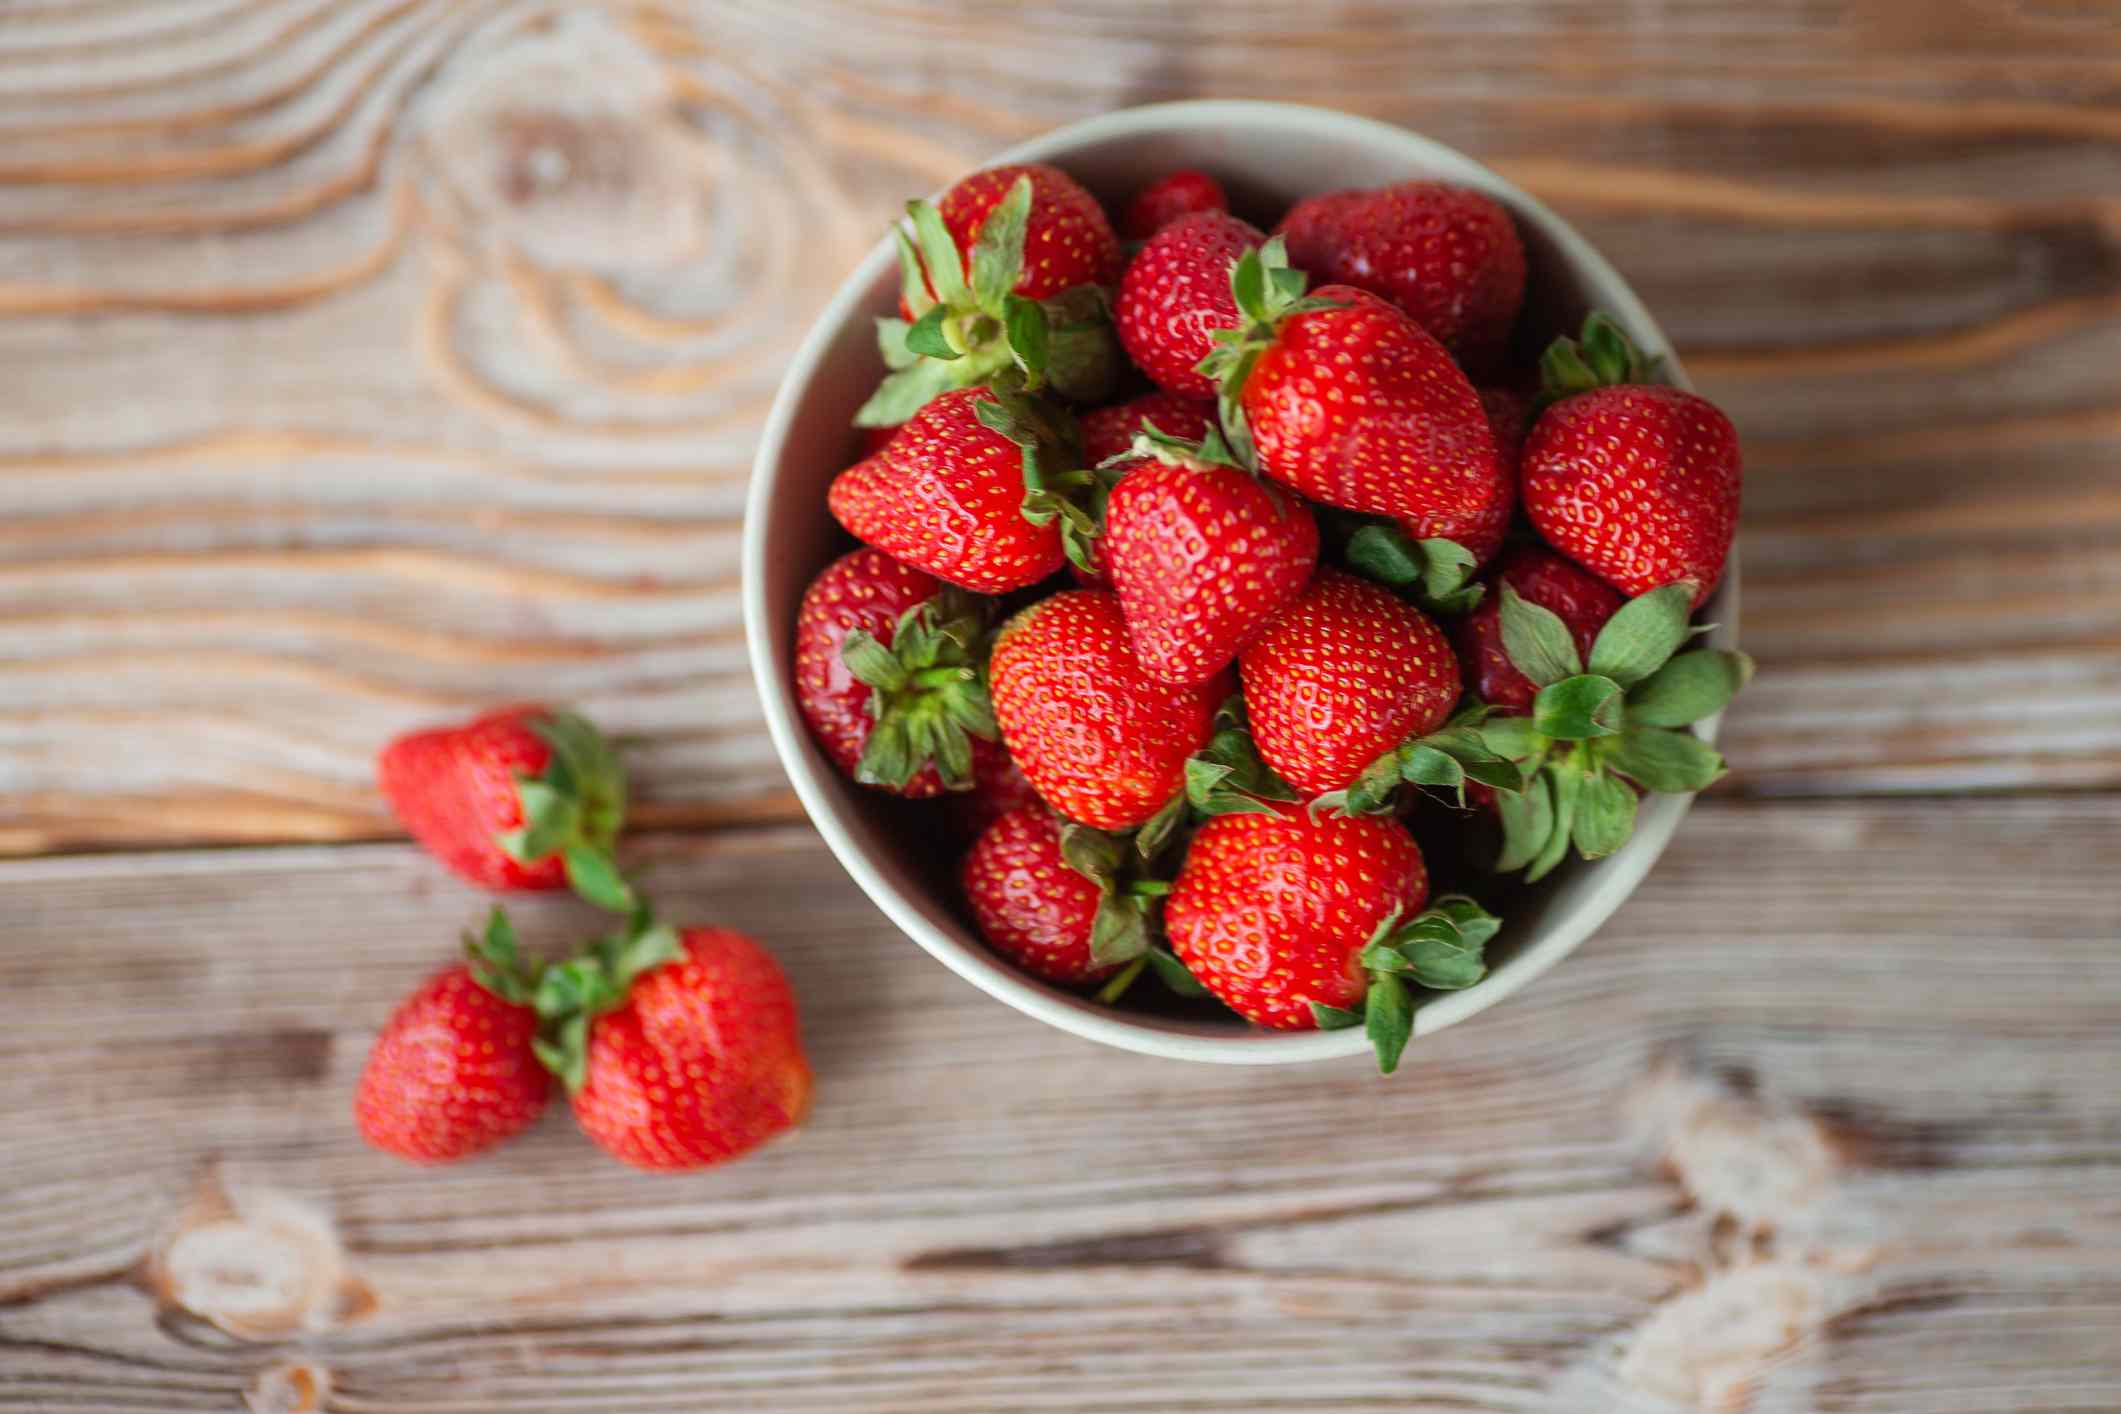 how-to-eat-strawberries-correctly